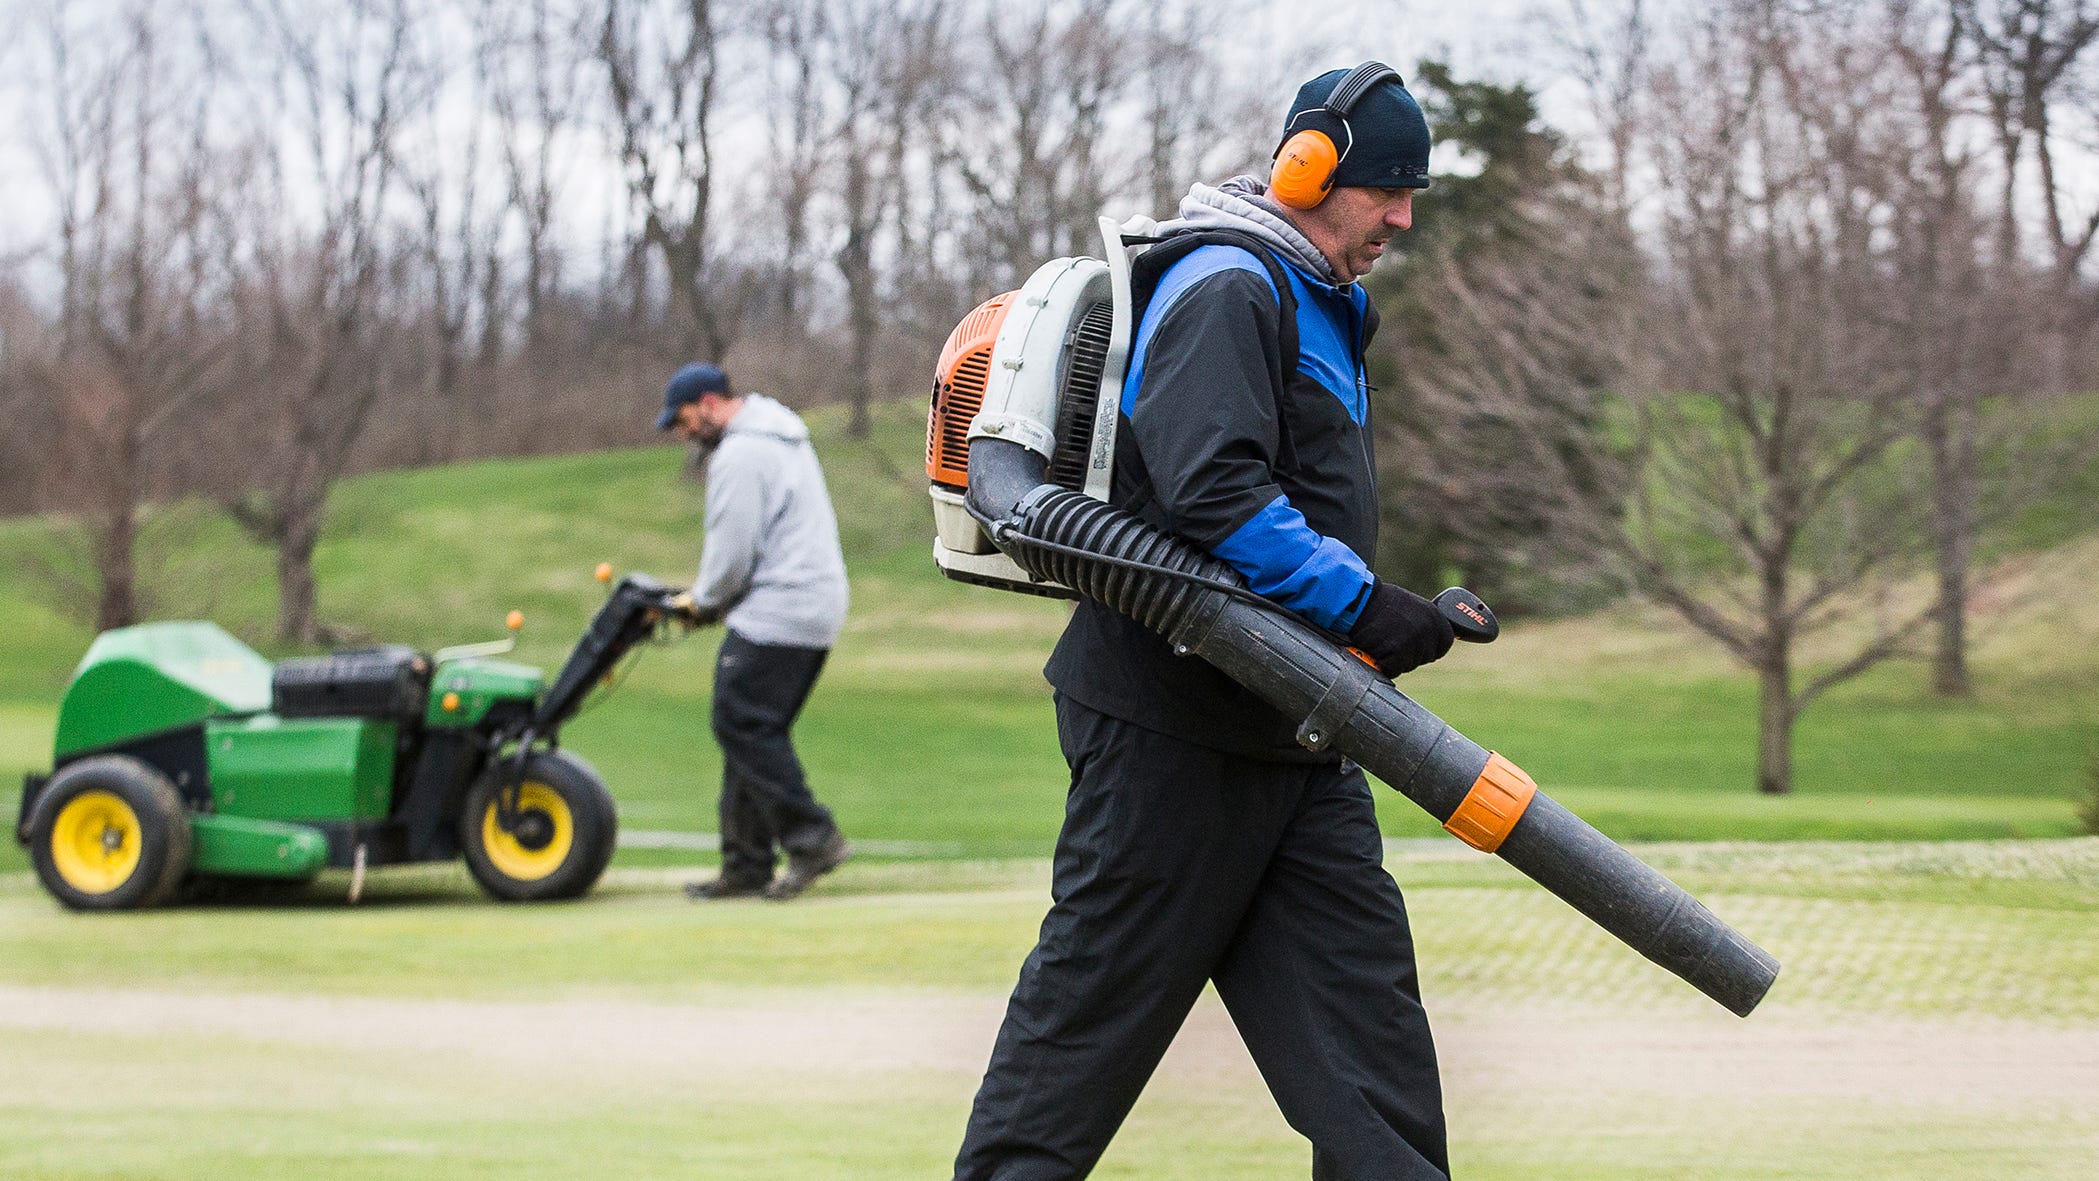 Delaware County golf courses remain open, adapt to COVID19 guidelines